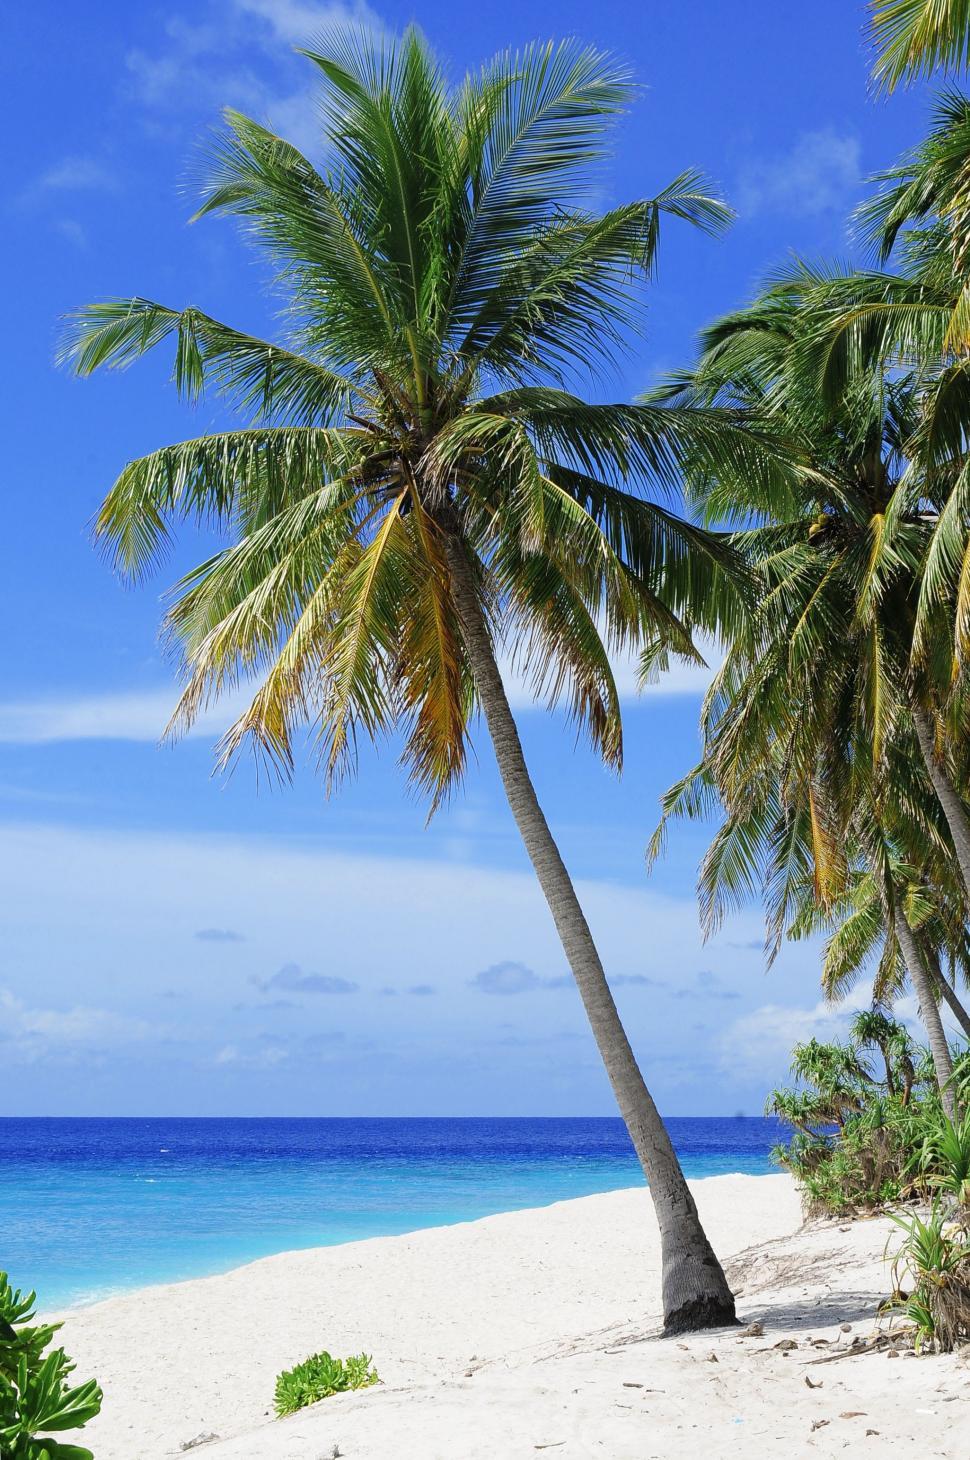 Download Free Stock Photo of Palm Tree and Beach  